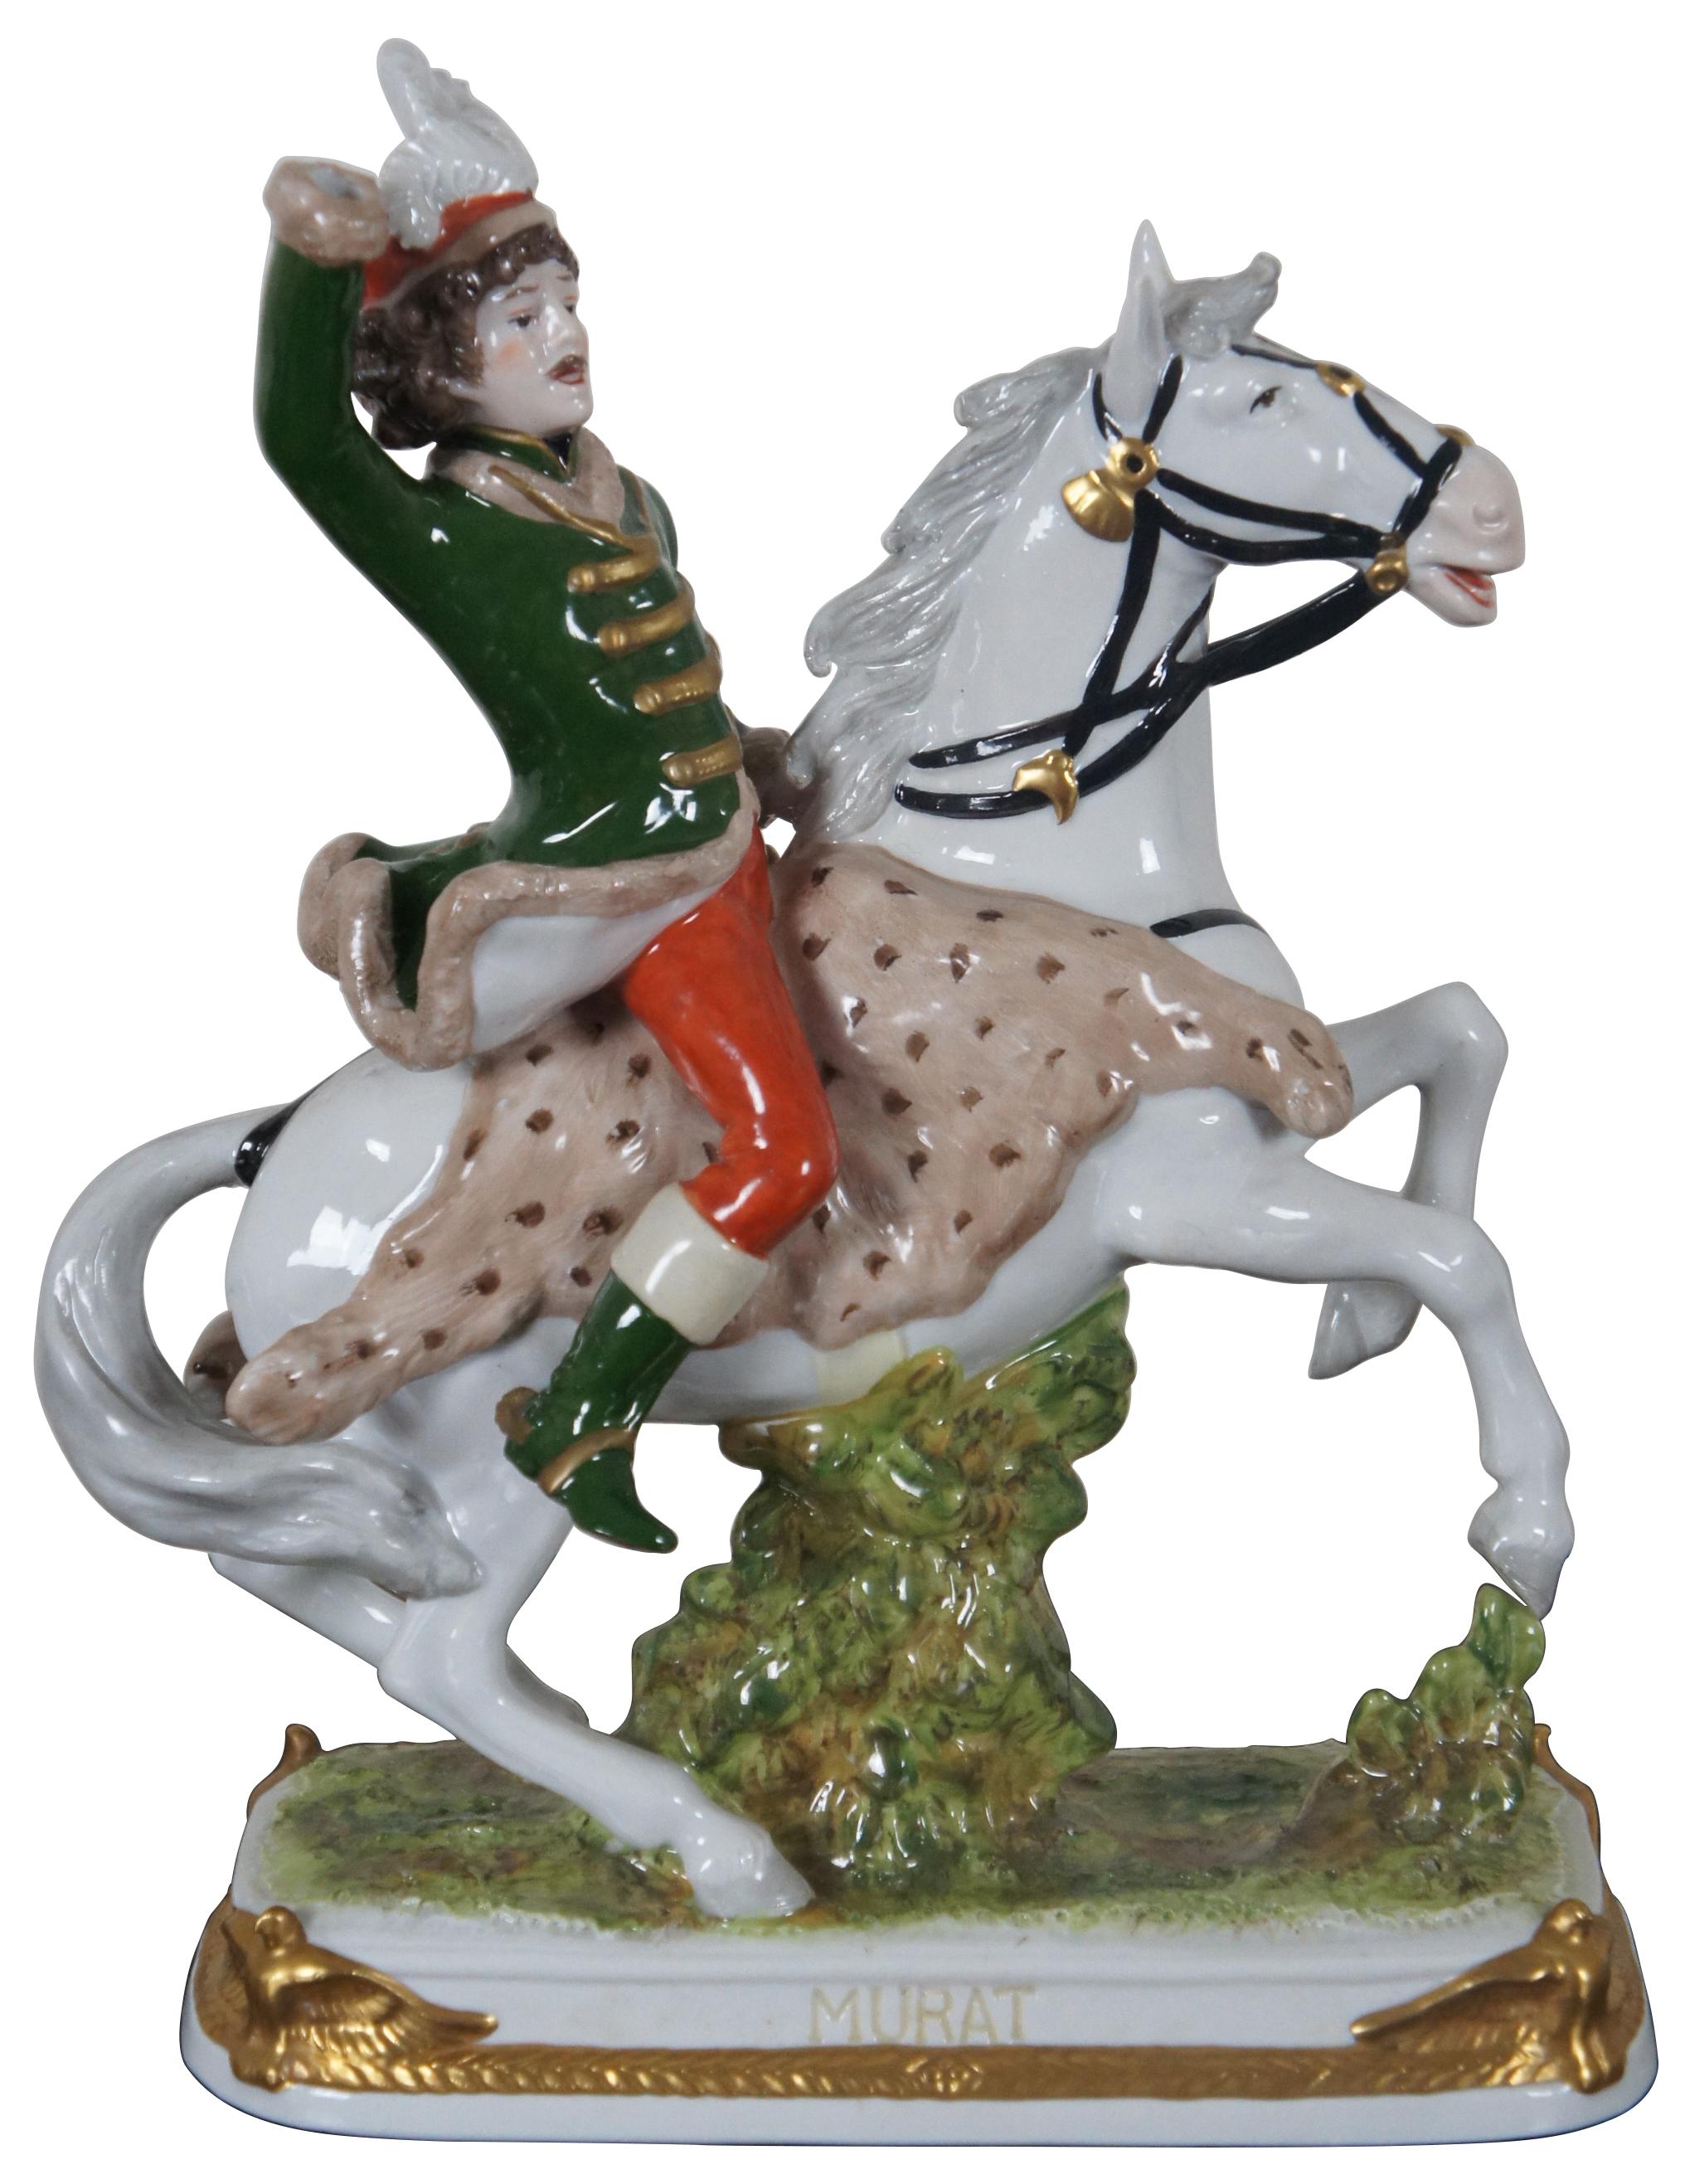 Antique Kister porcelain figurine of Joachim Murat riding a white horse. “A.W. Fr. Kister Porcelain Manufactory of Scheibe-Alsbach, Thuringia, Germany, used this mark from 1900 to 1972. (